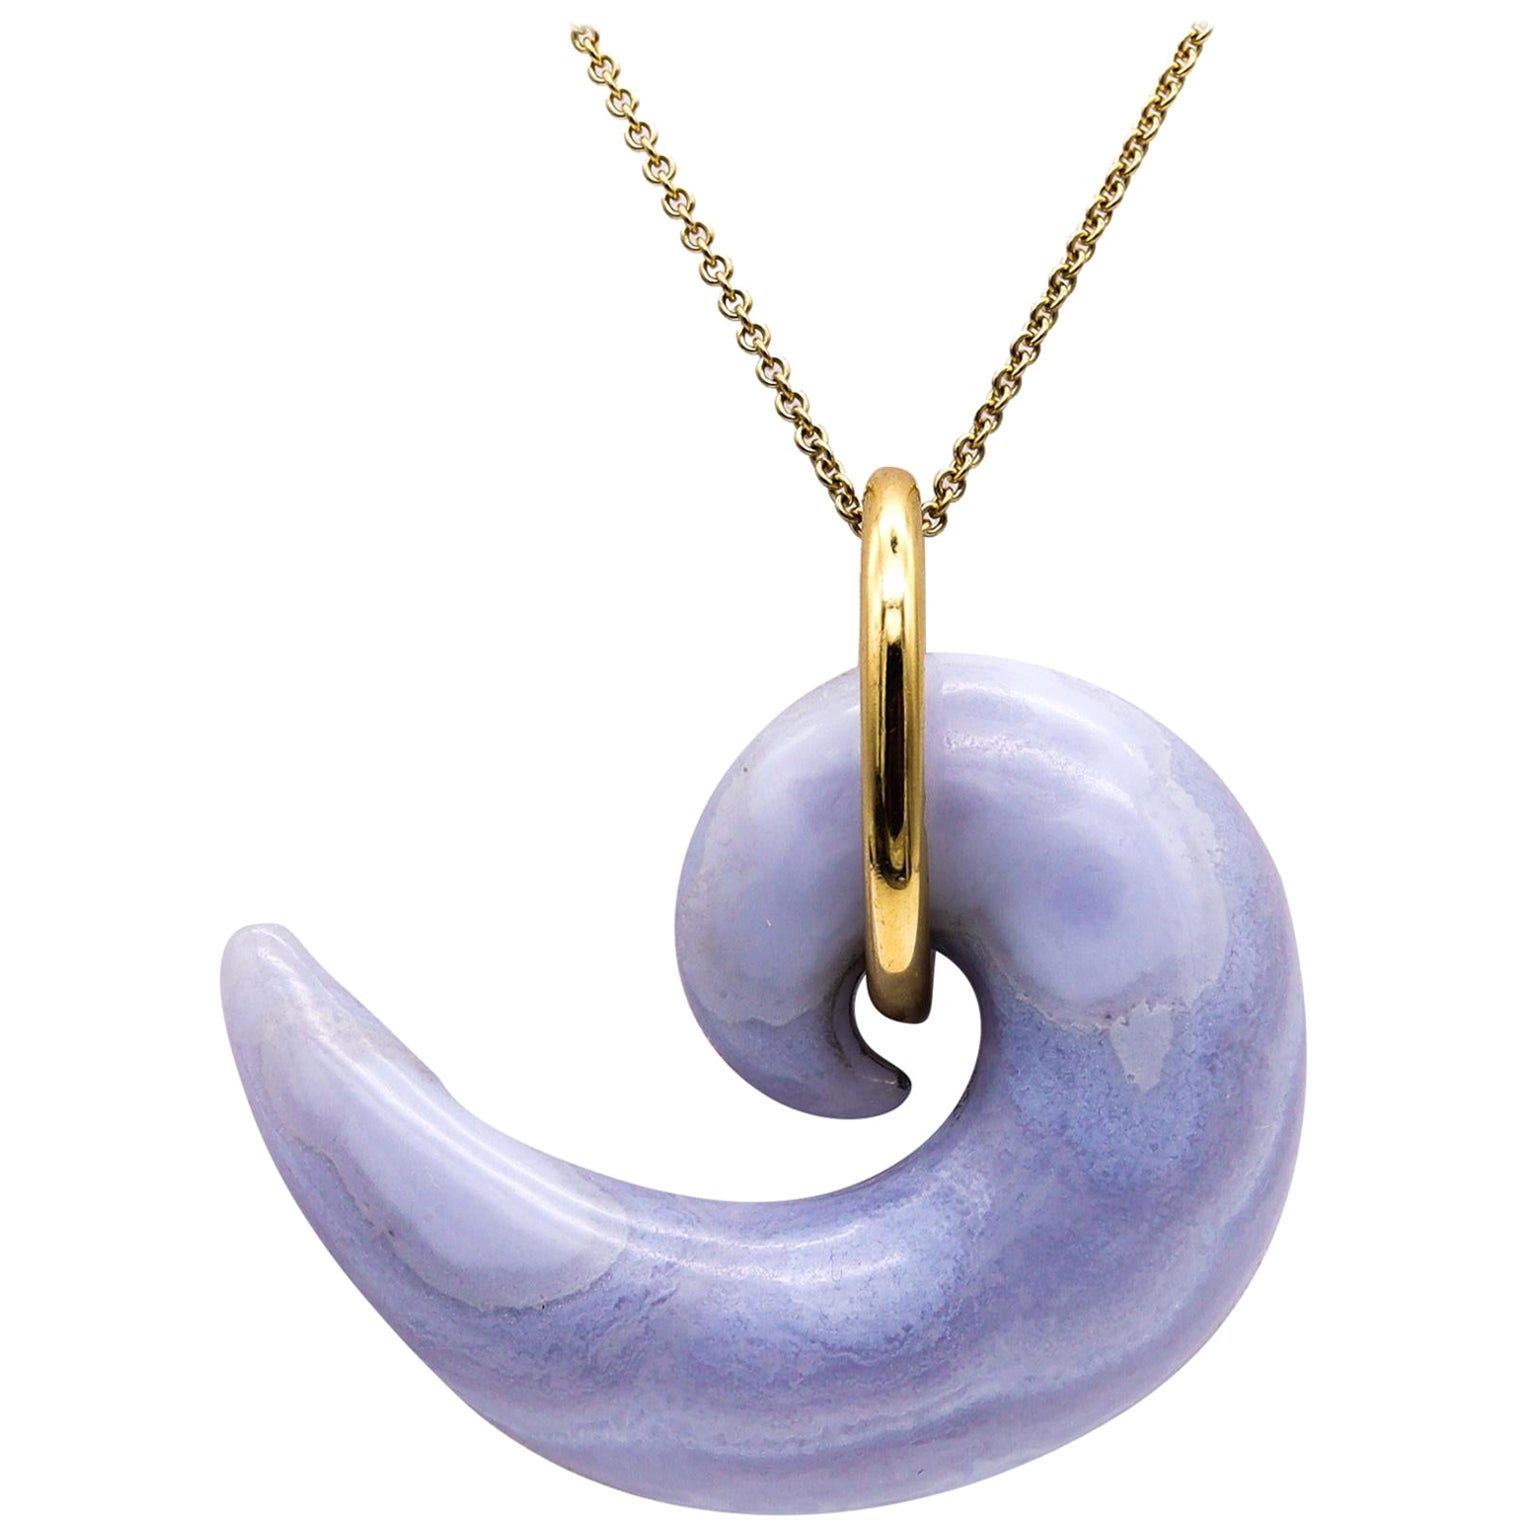 Tiffany & Co. 1970 Angela Cummings Blue Lace Agate Comma Necklace in 18Kt Gold